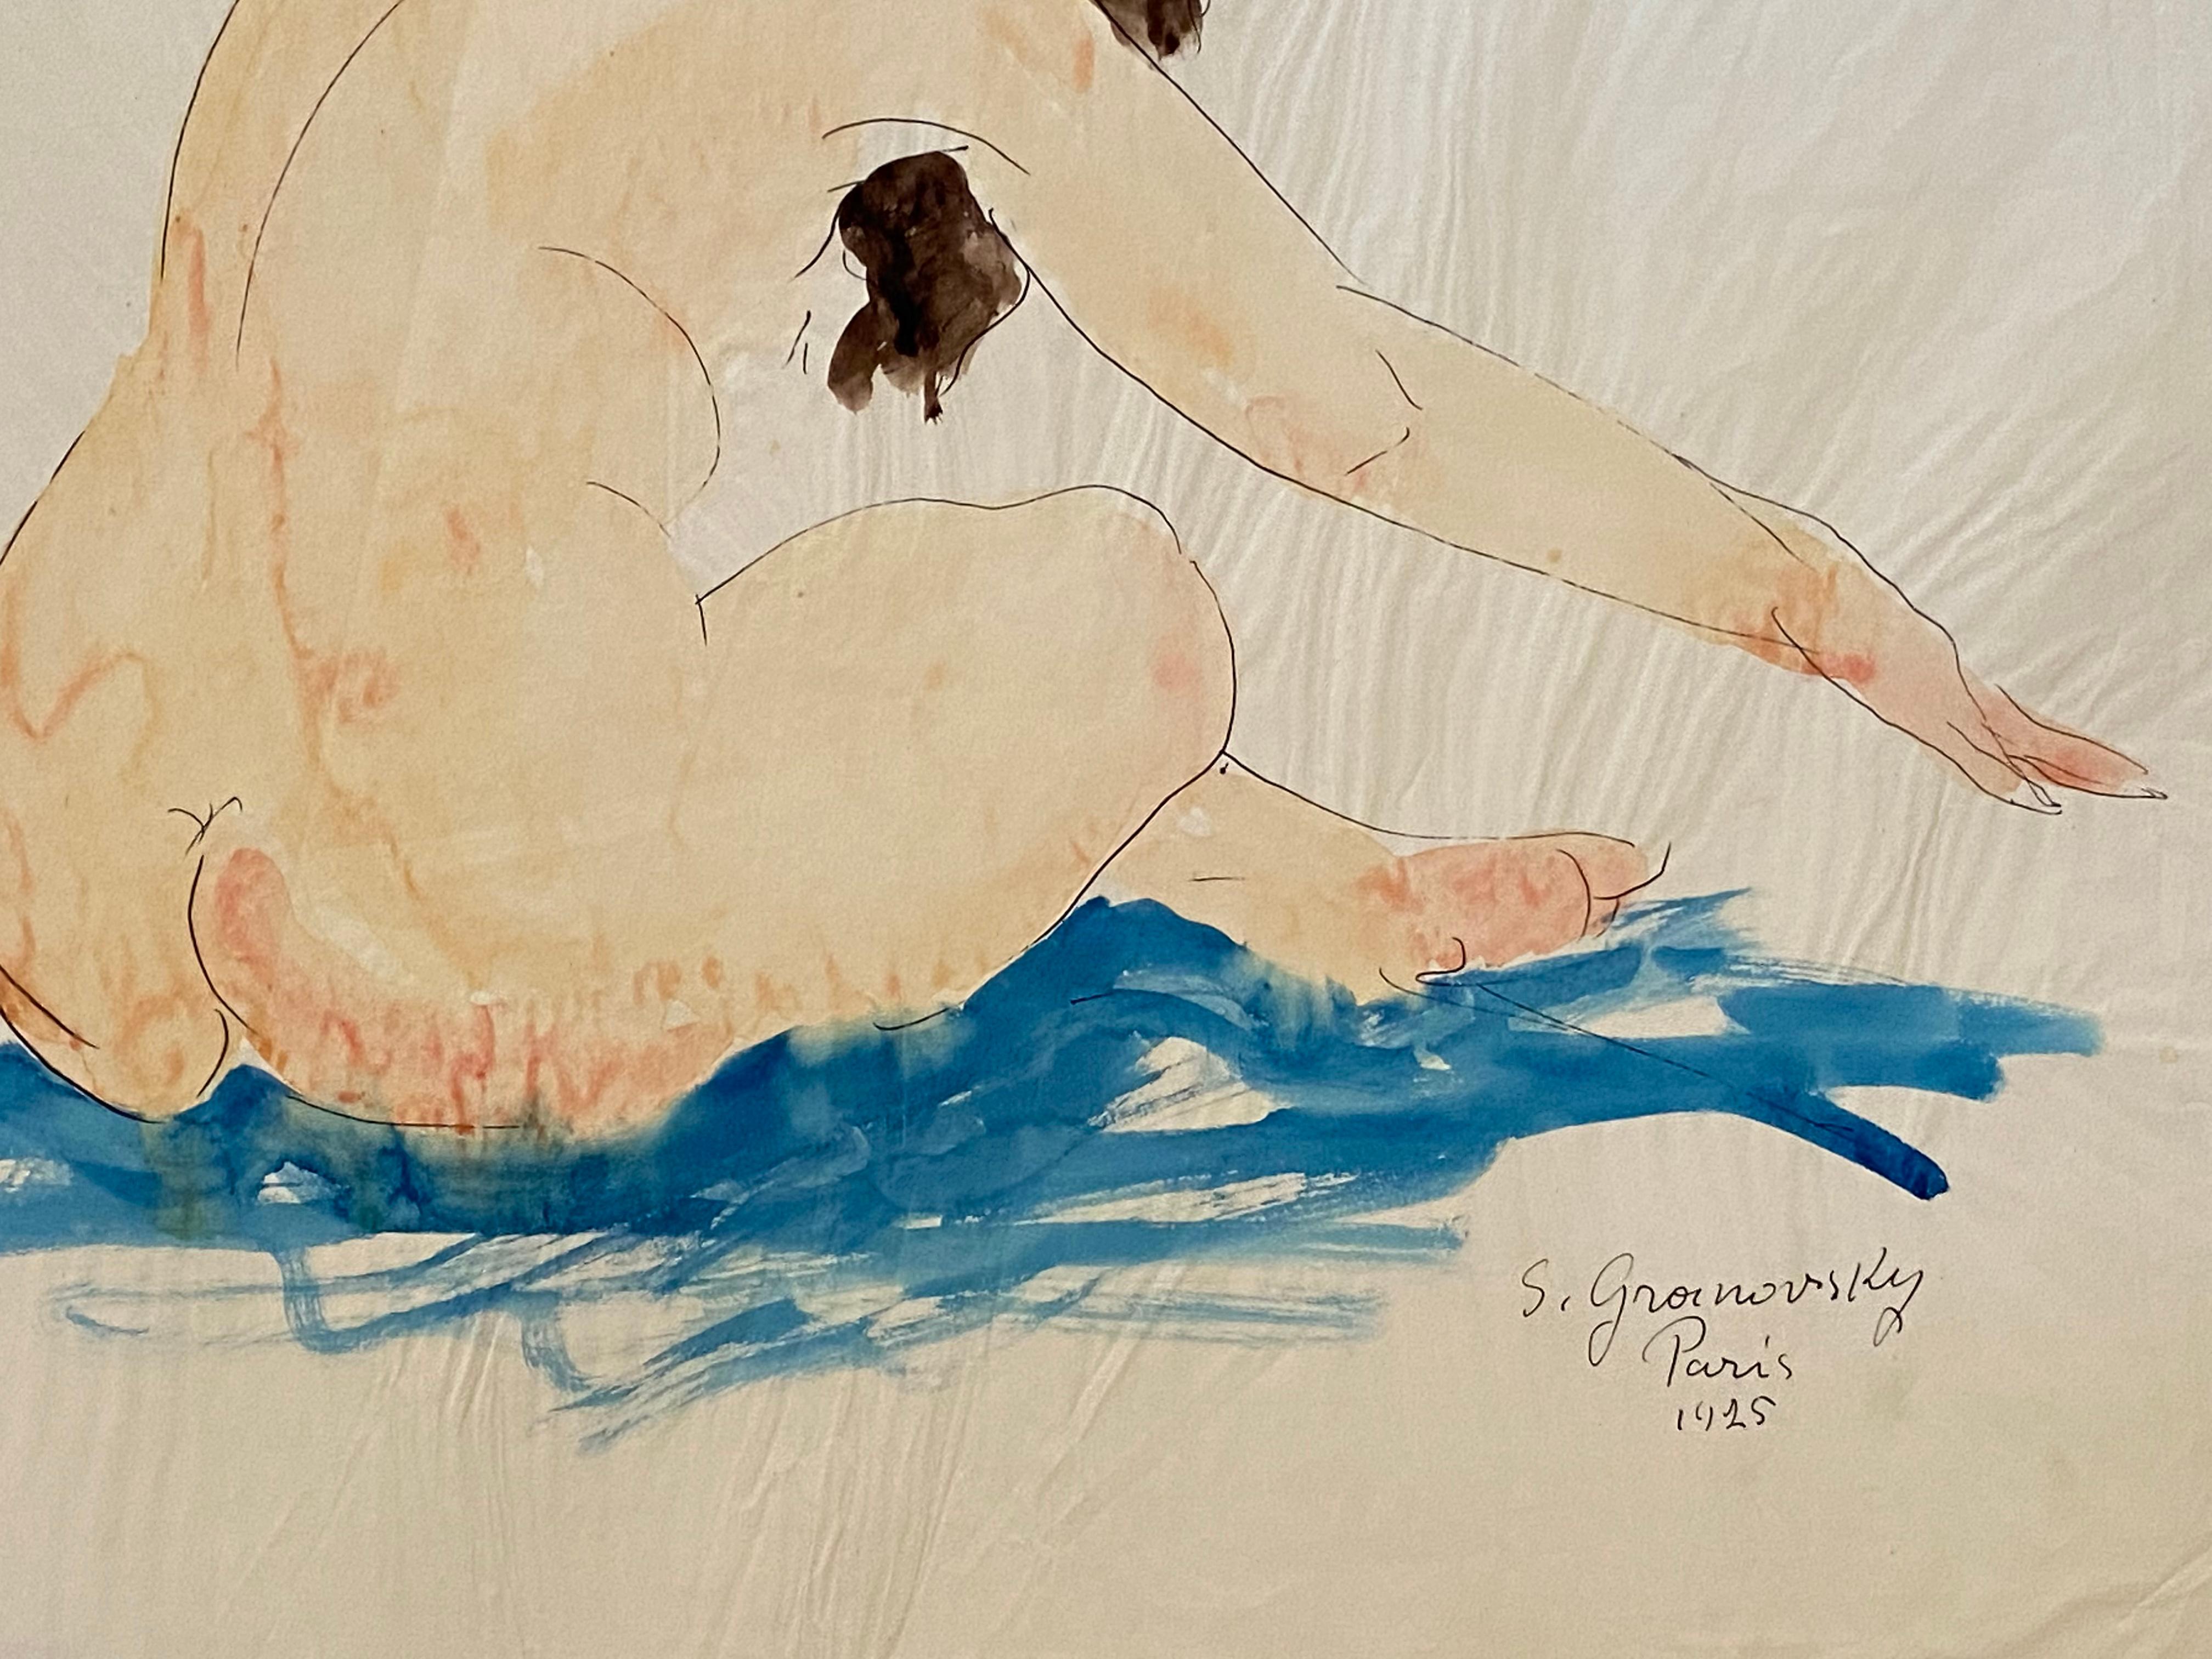 Wonderful mixed media artwork of a female nude with arms in motion by Samuel Granovsky. Signed and dated 1925, Paris in india ink lower right. The figure is outlined in india ink and the rest of the artwork’s medium is watercolor. Condition is good.